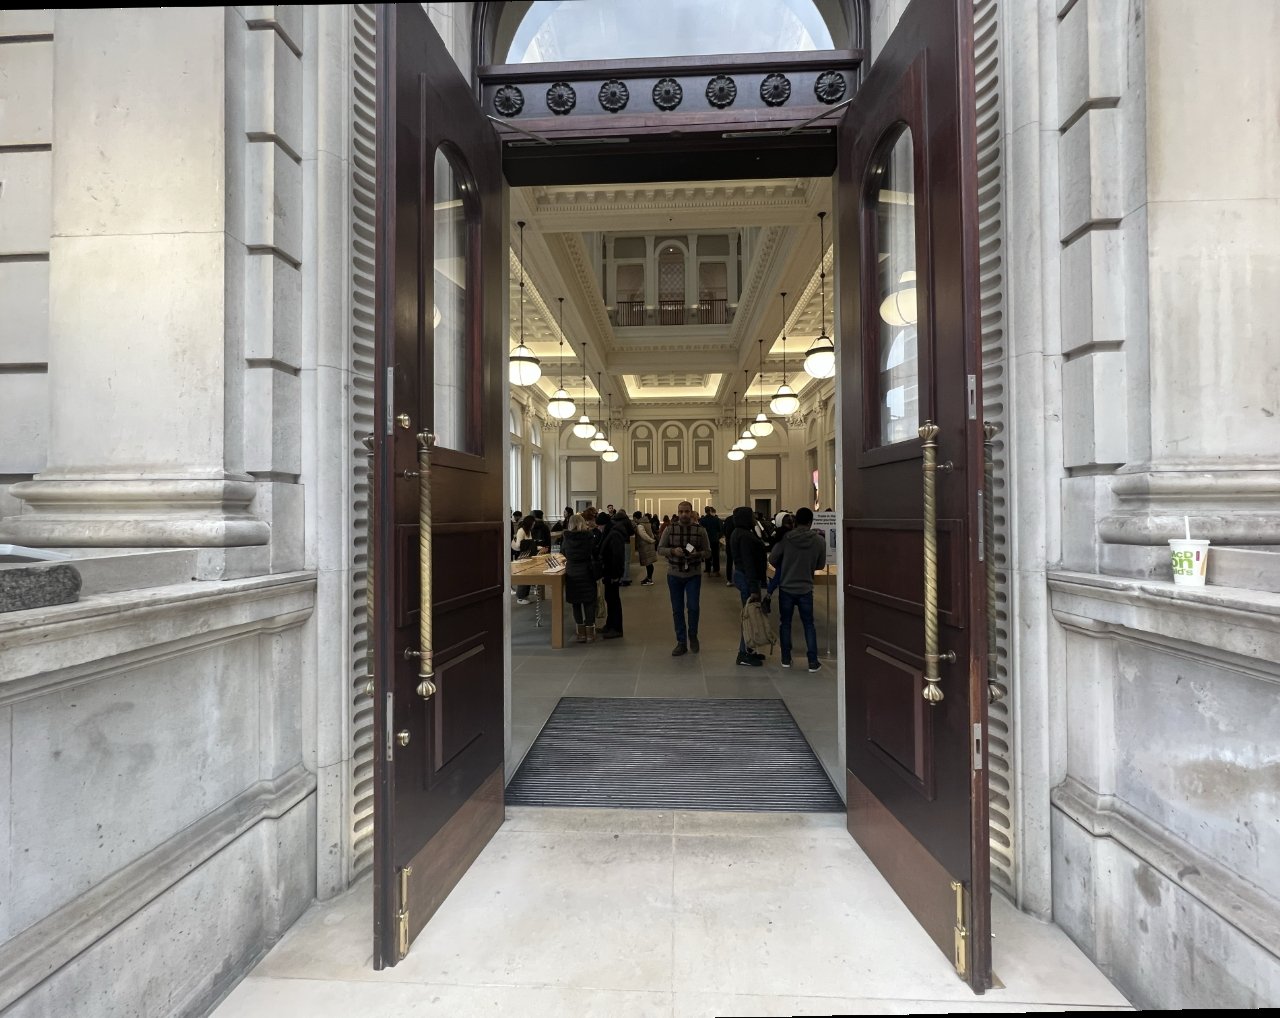 Pass through the 19th century bank doors to the Apple Store